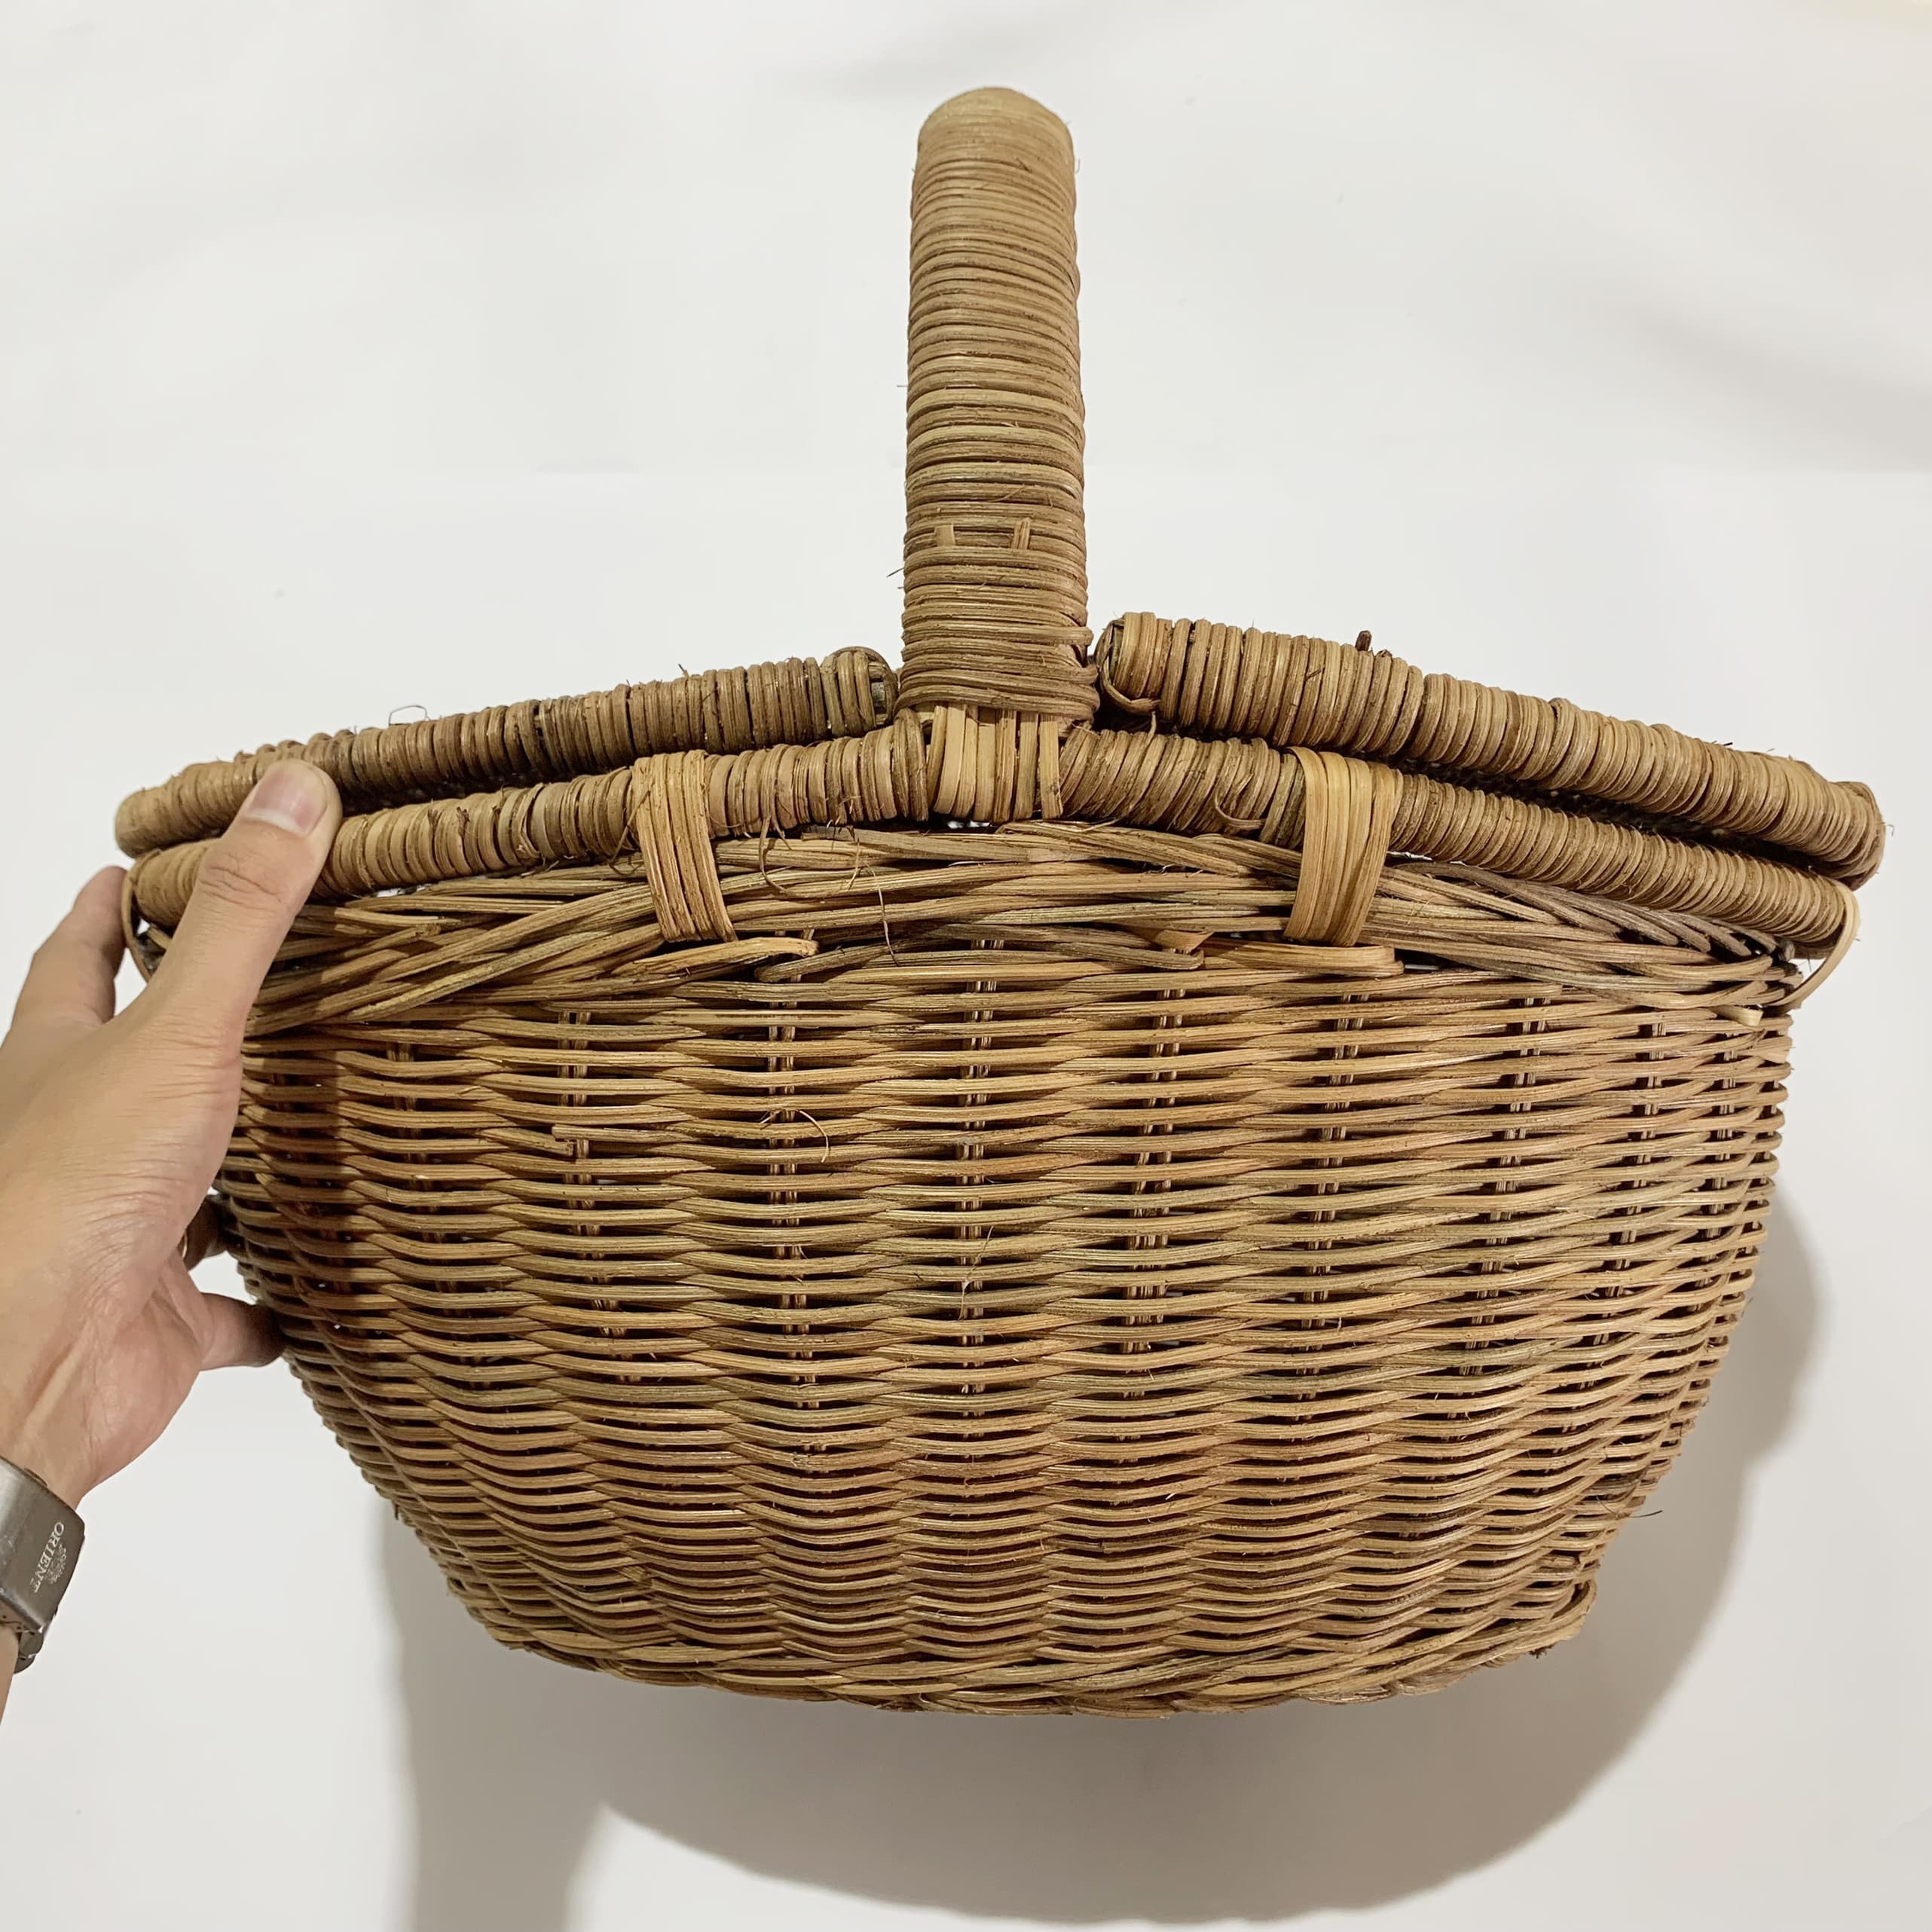 Wicker Buff Rattan Woven Picnic Basket with Lids and Handles Manufactured in Vietnam